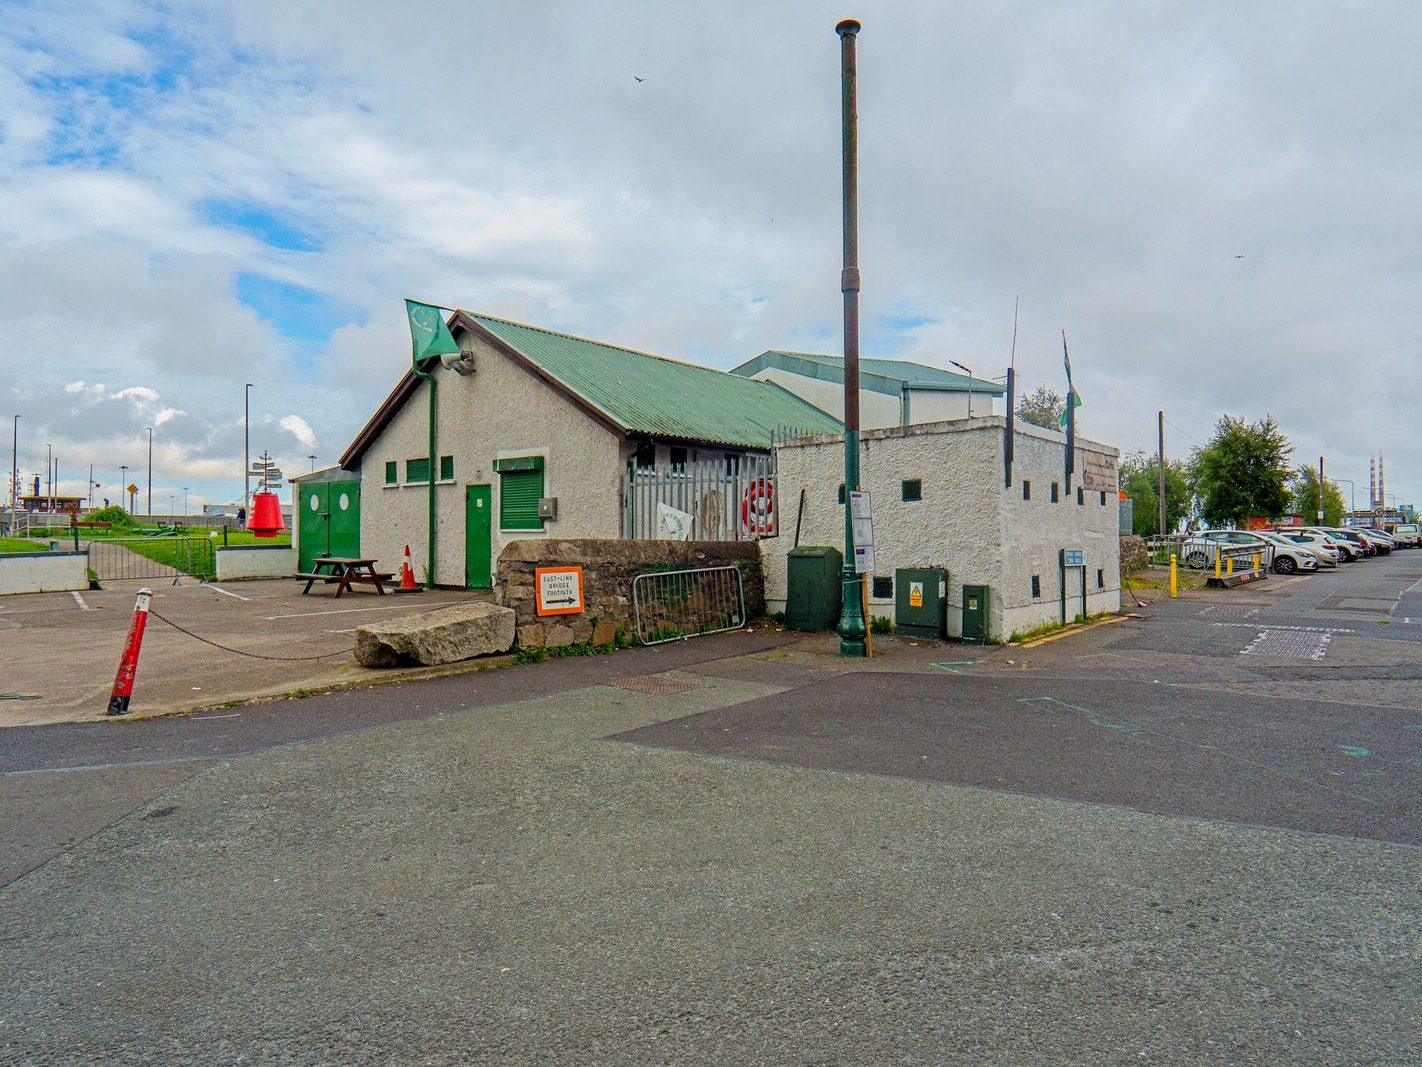 ST PATRICKS ROWING CLUB AND NEARBY [YORK ROAD AND THORNCASTLE STREET] 005